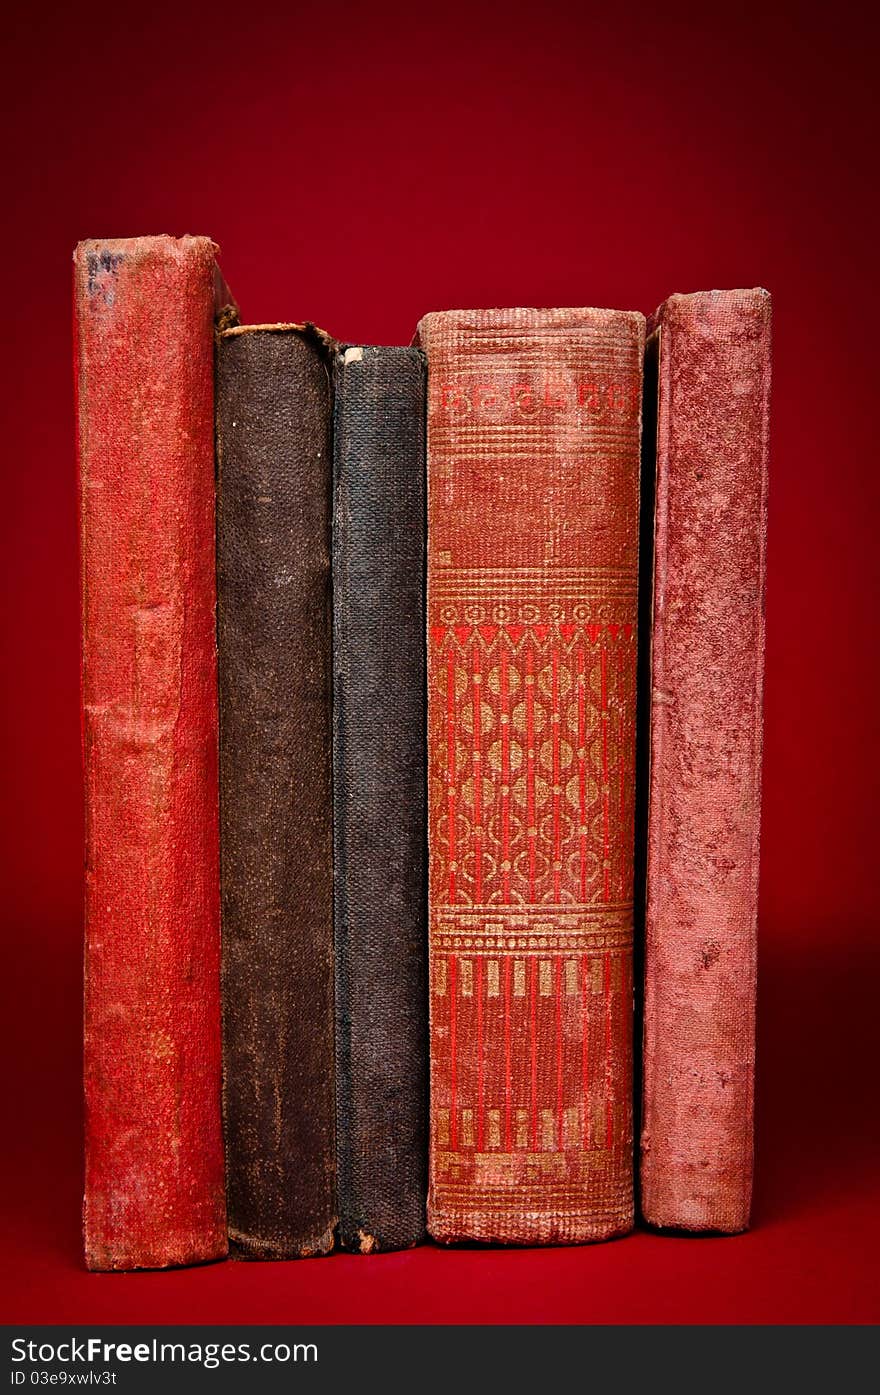 Old antique books from scuffs and scratches. Old antique books from scuffs and scratches